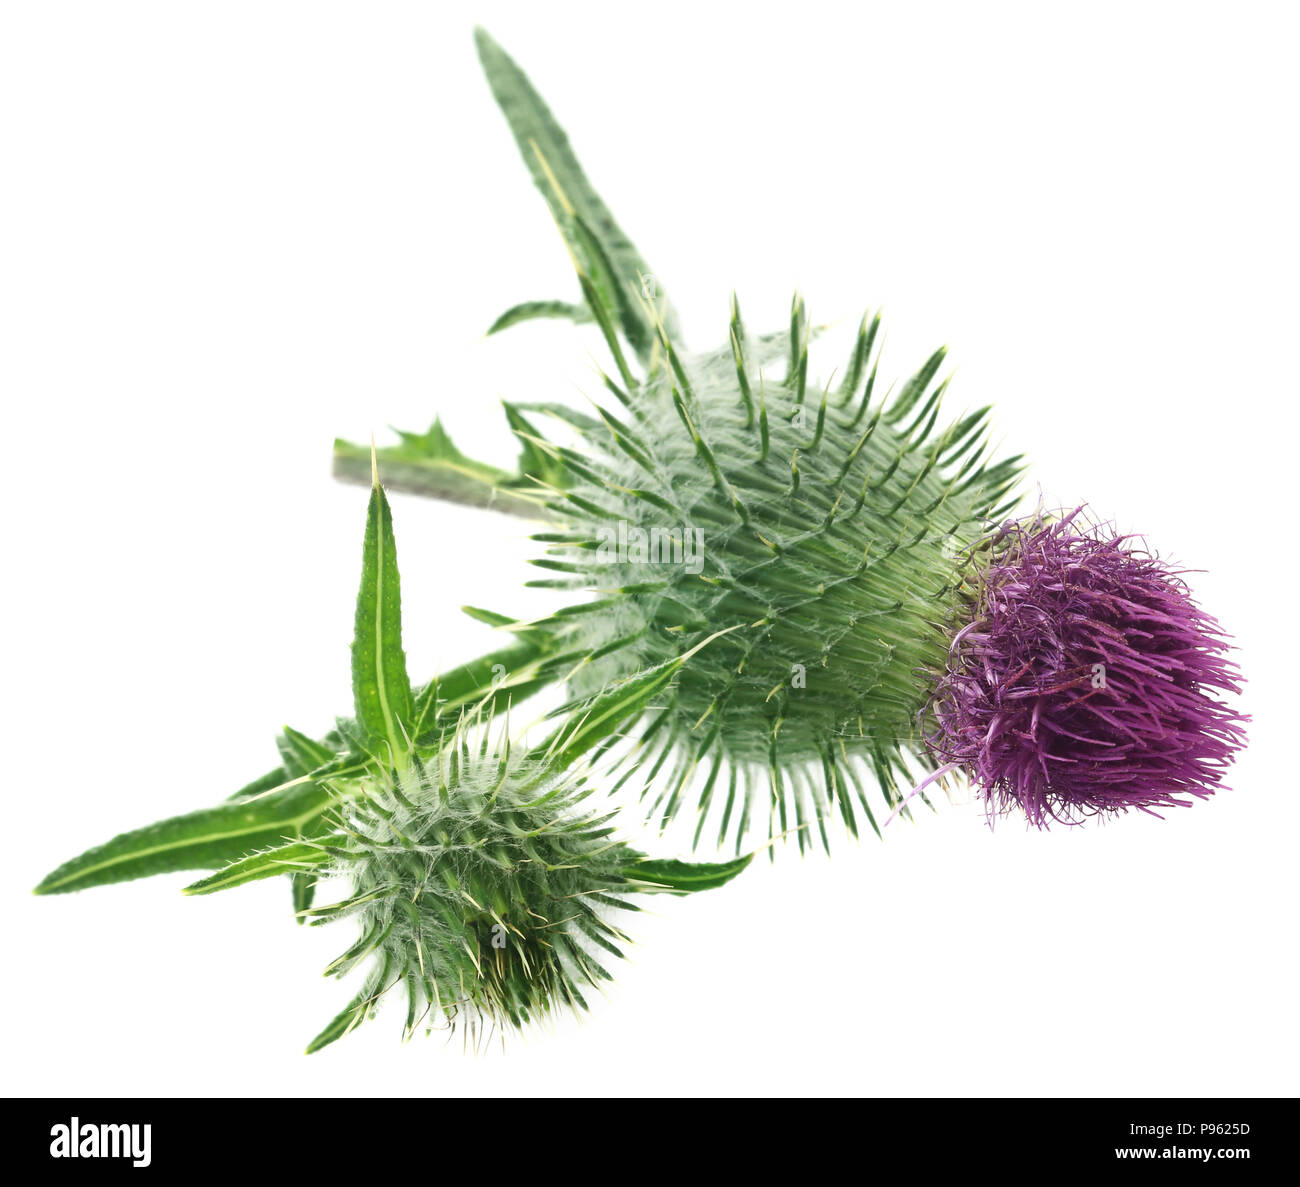 Milk thistle used as medicinal herb over white background Stock Photo